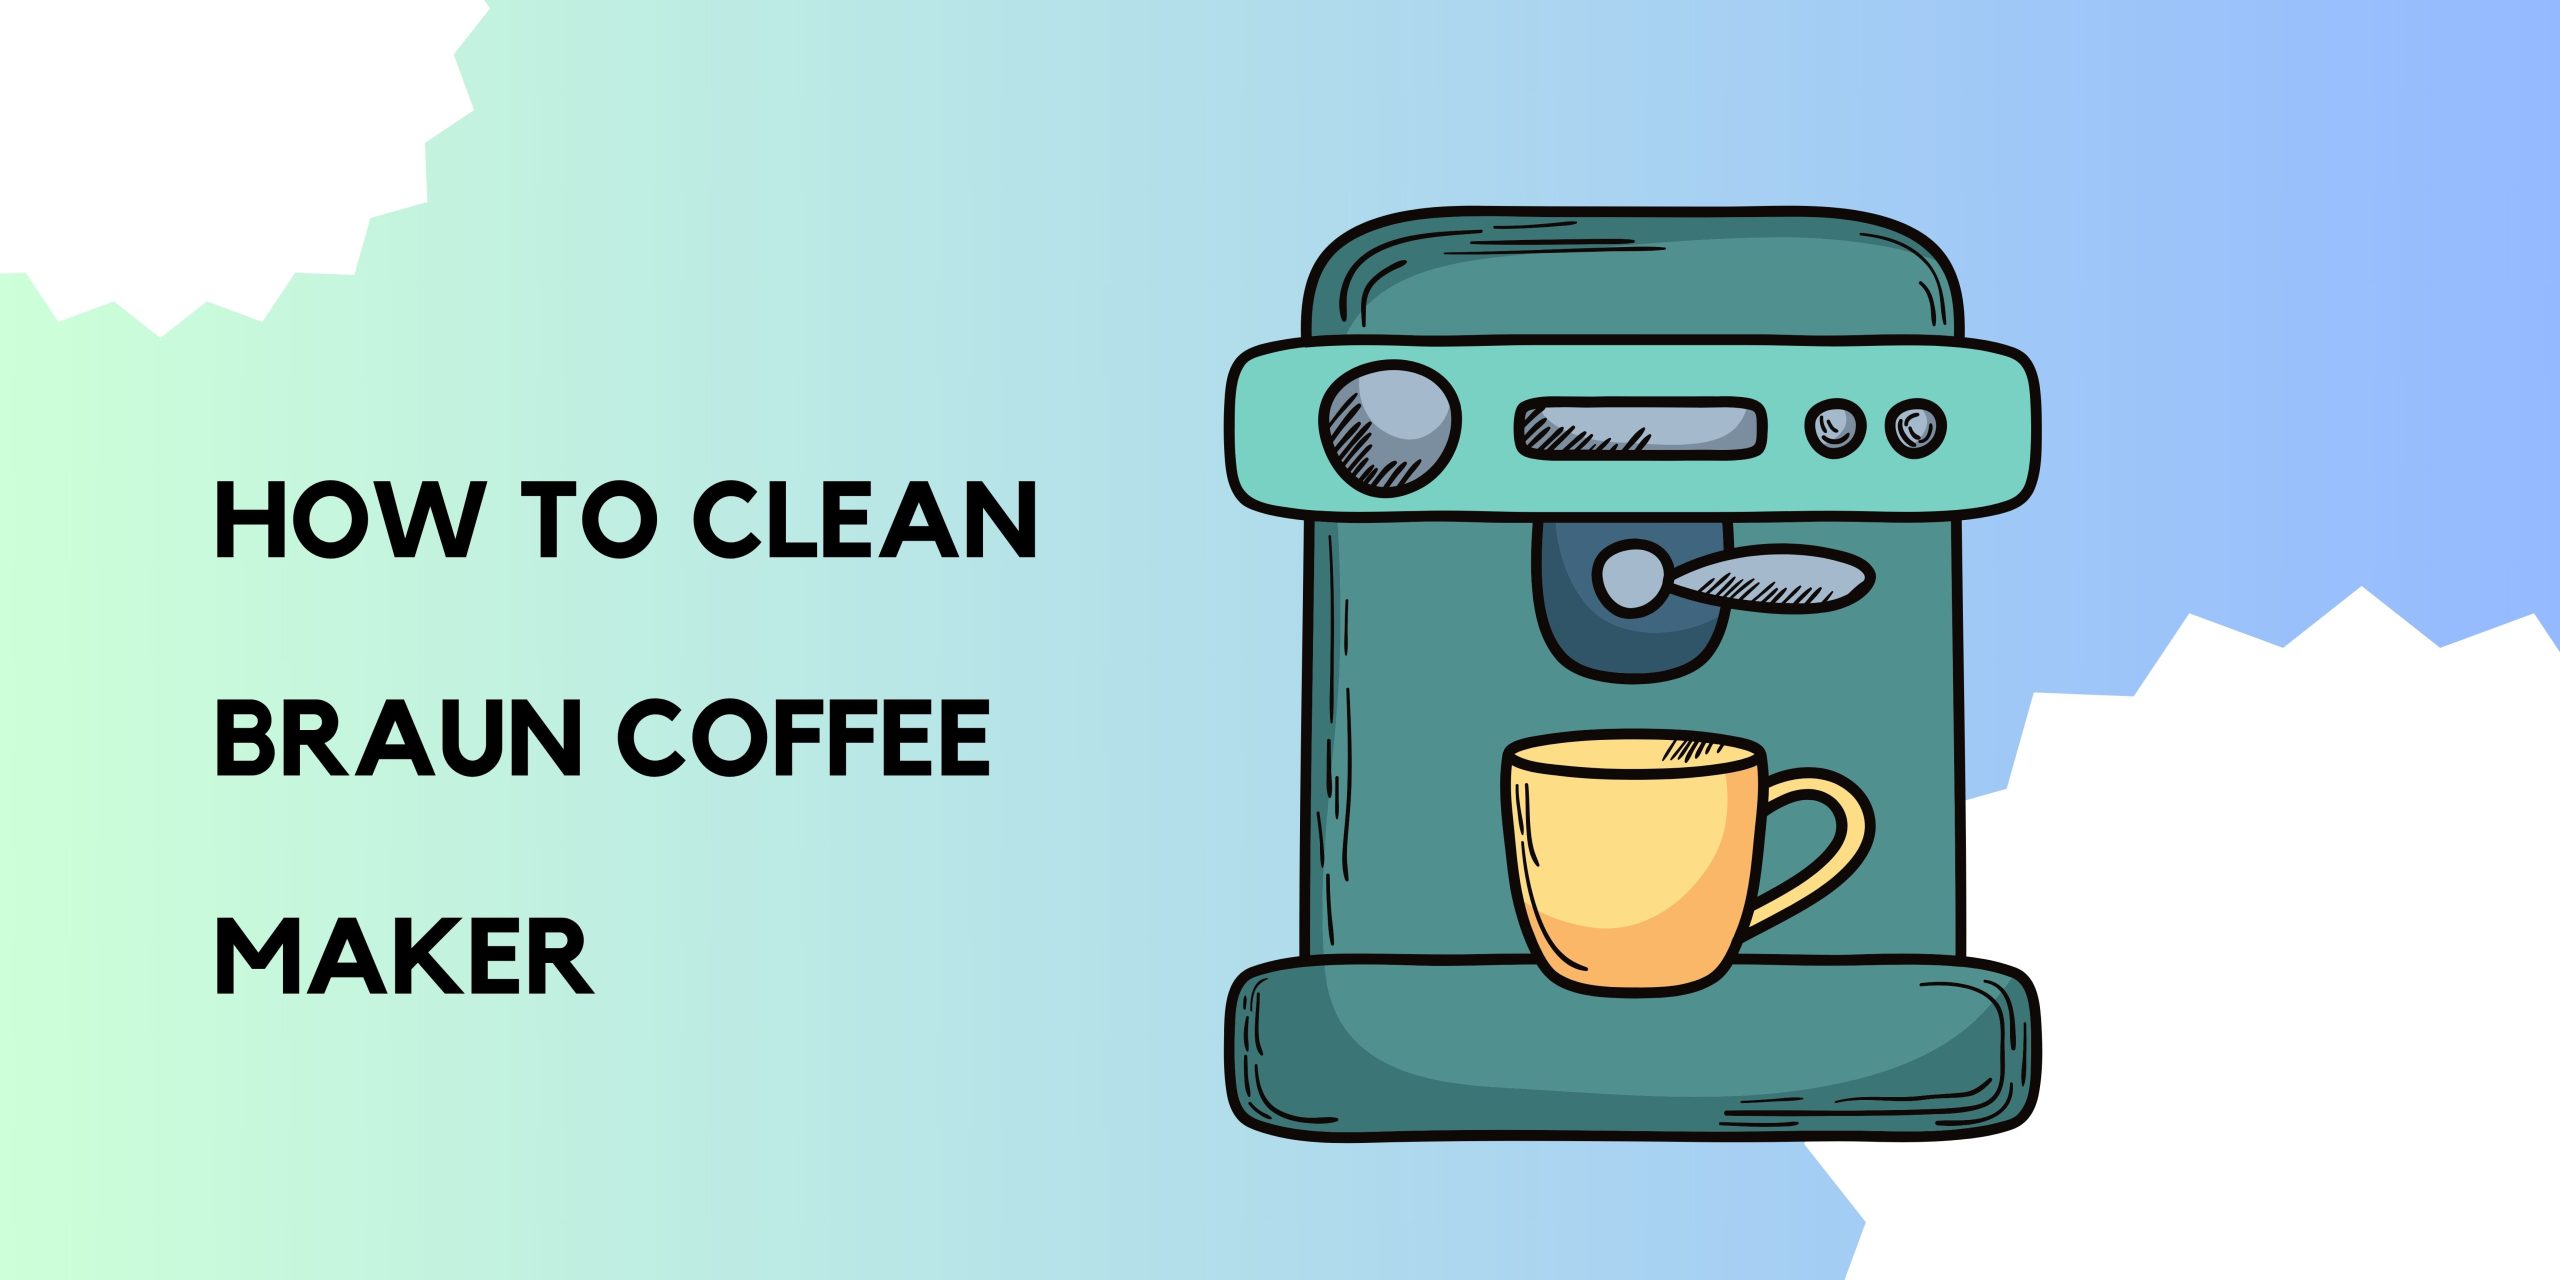 How to clean braun coffee maker